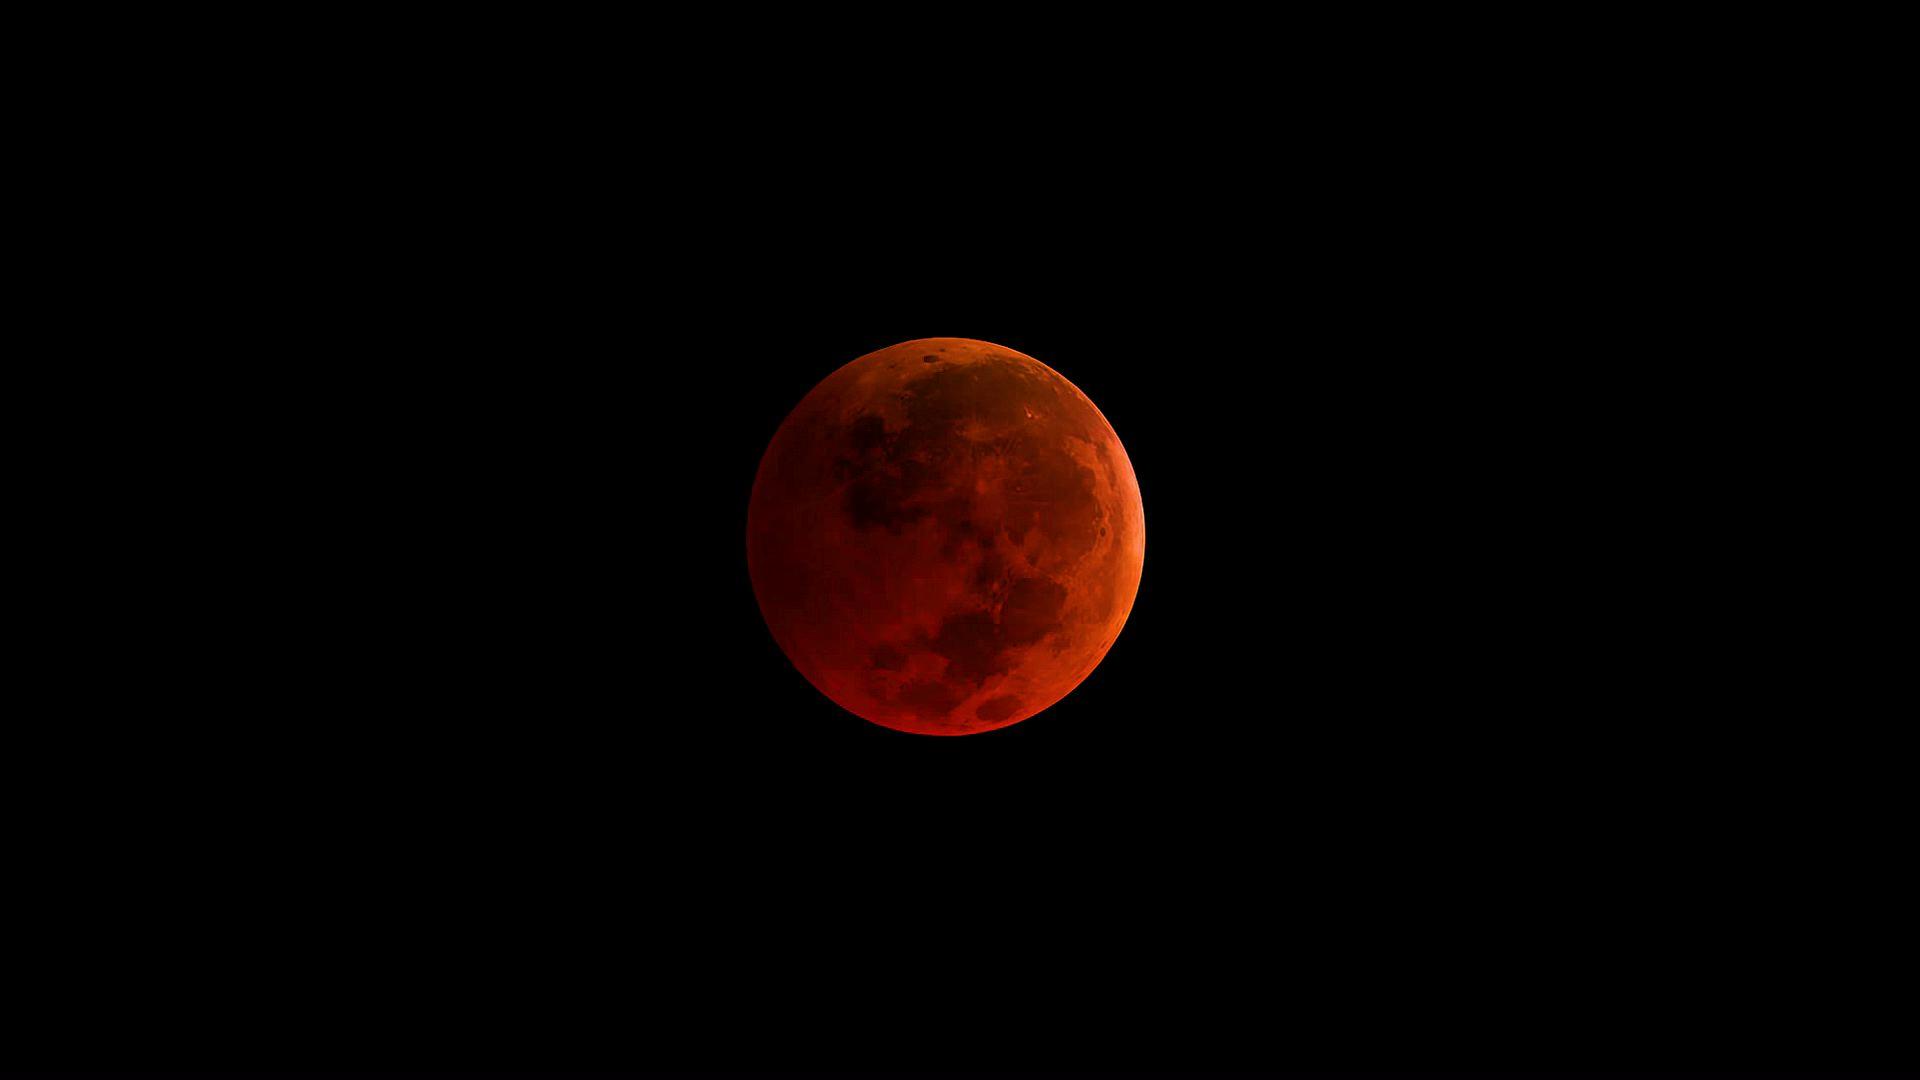 Chicago Not Well Placed for Super Blue Blood Moon Chicago News